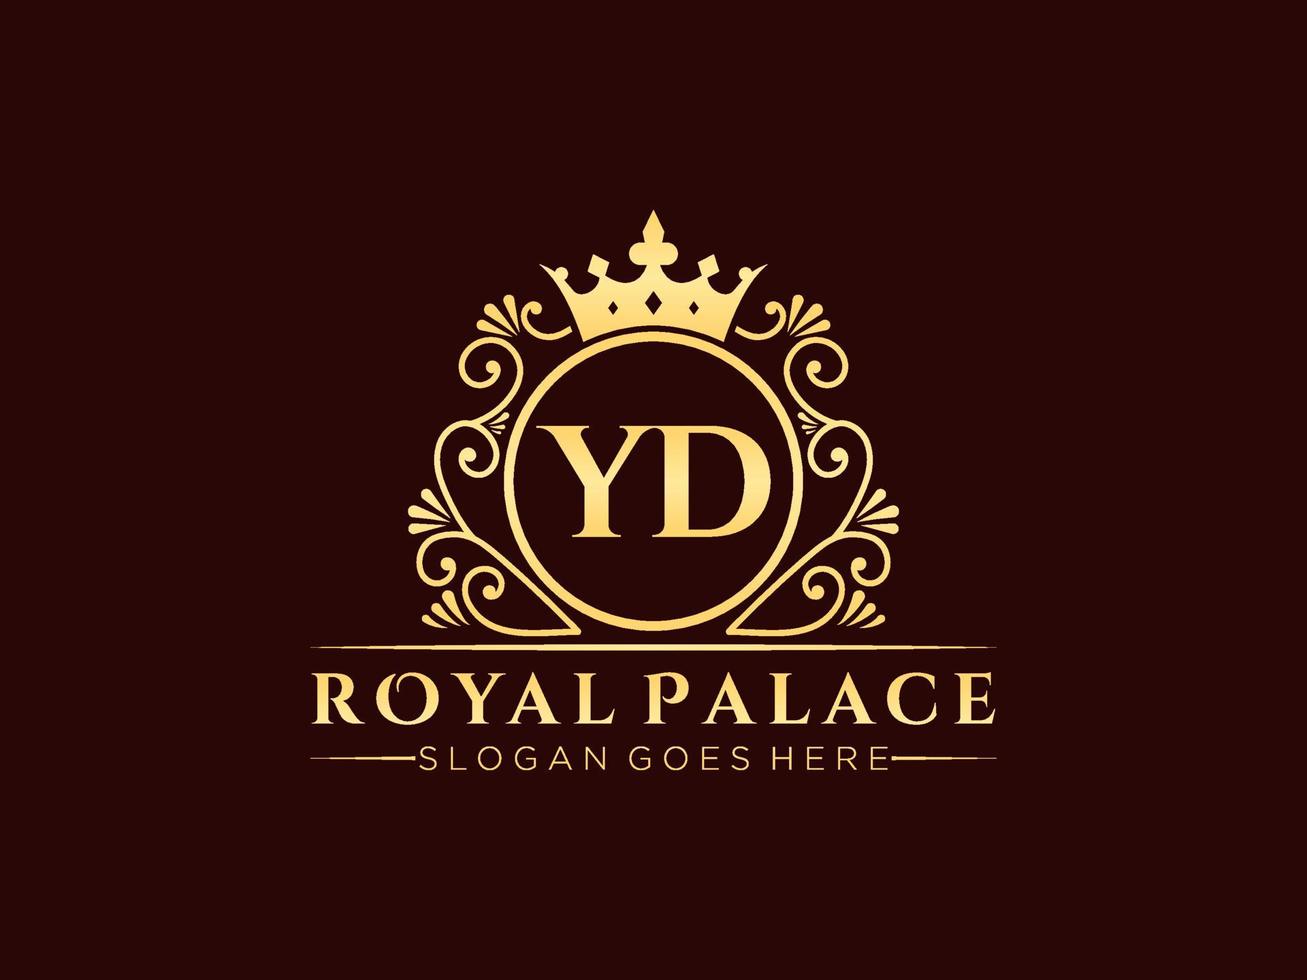 Letter YD Antique royal luxury victorian logo with ornamental frame. vector